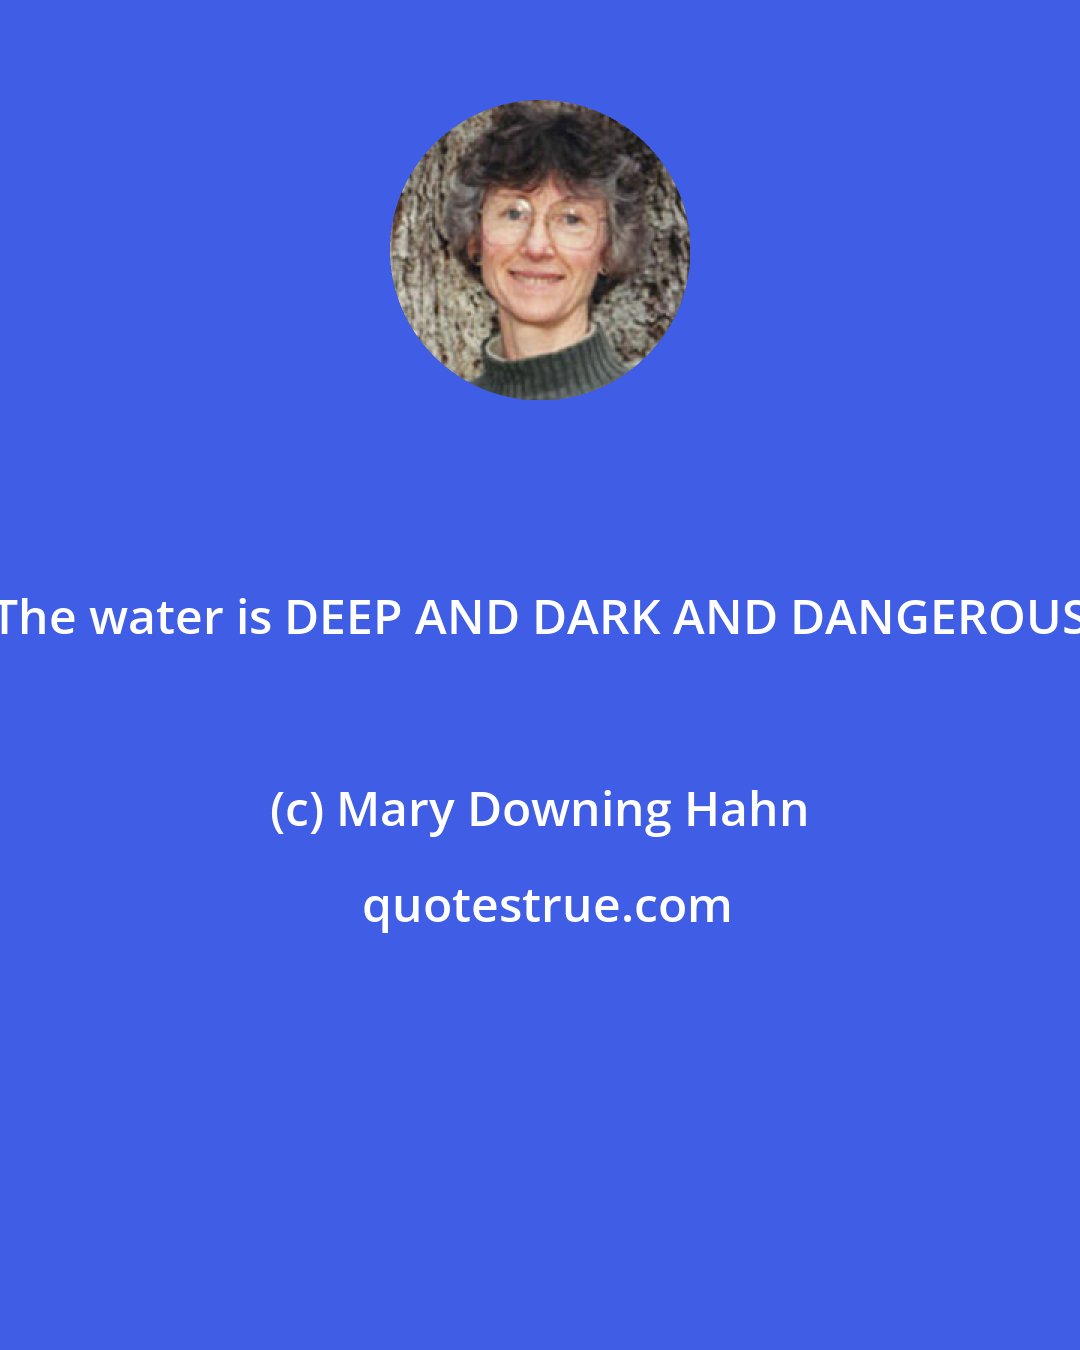 Mary Downing Hahn: The water is DEEP AND DARK AND DANGEROUS